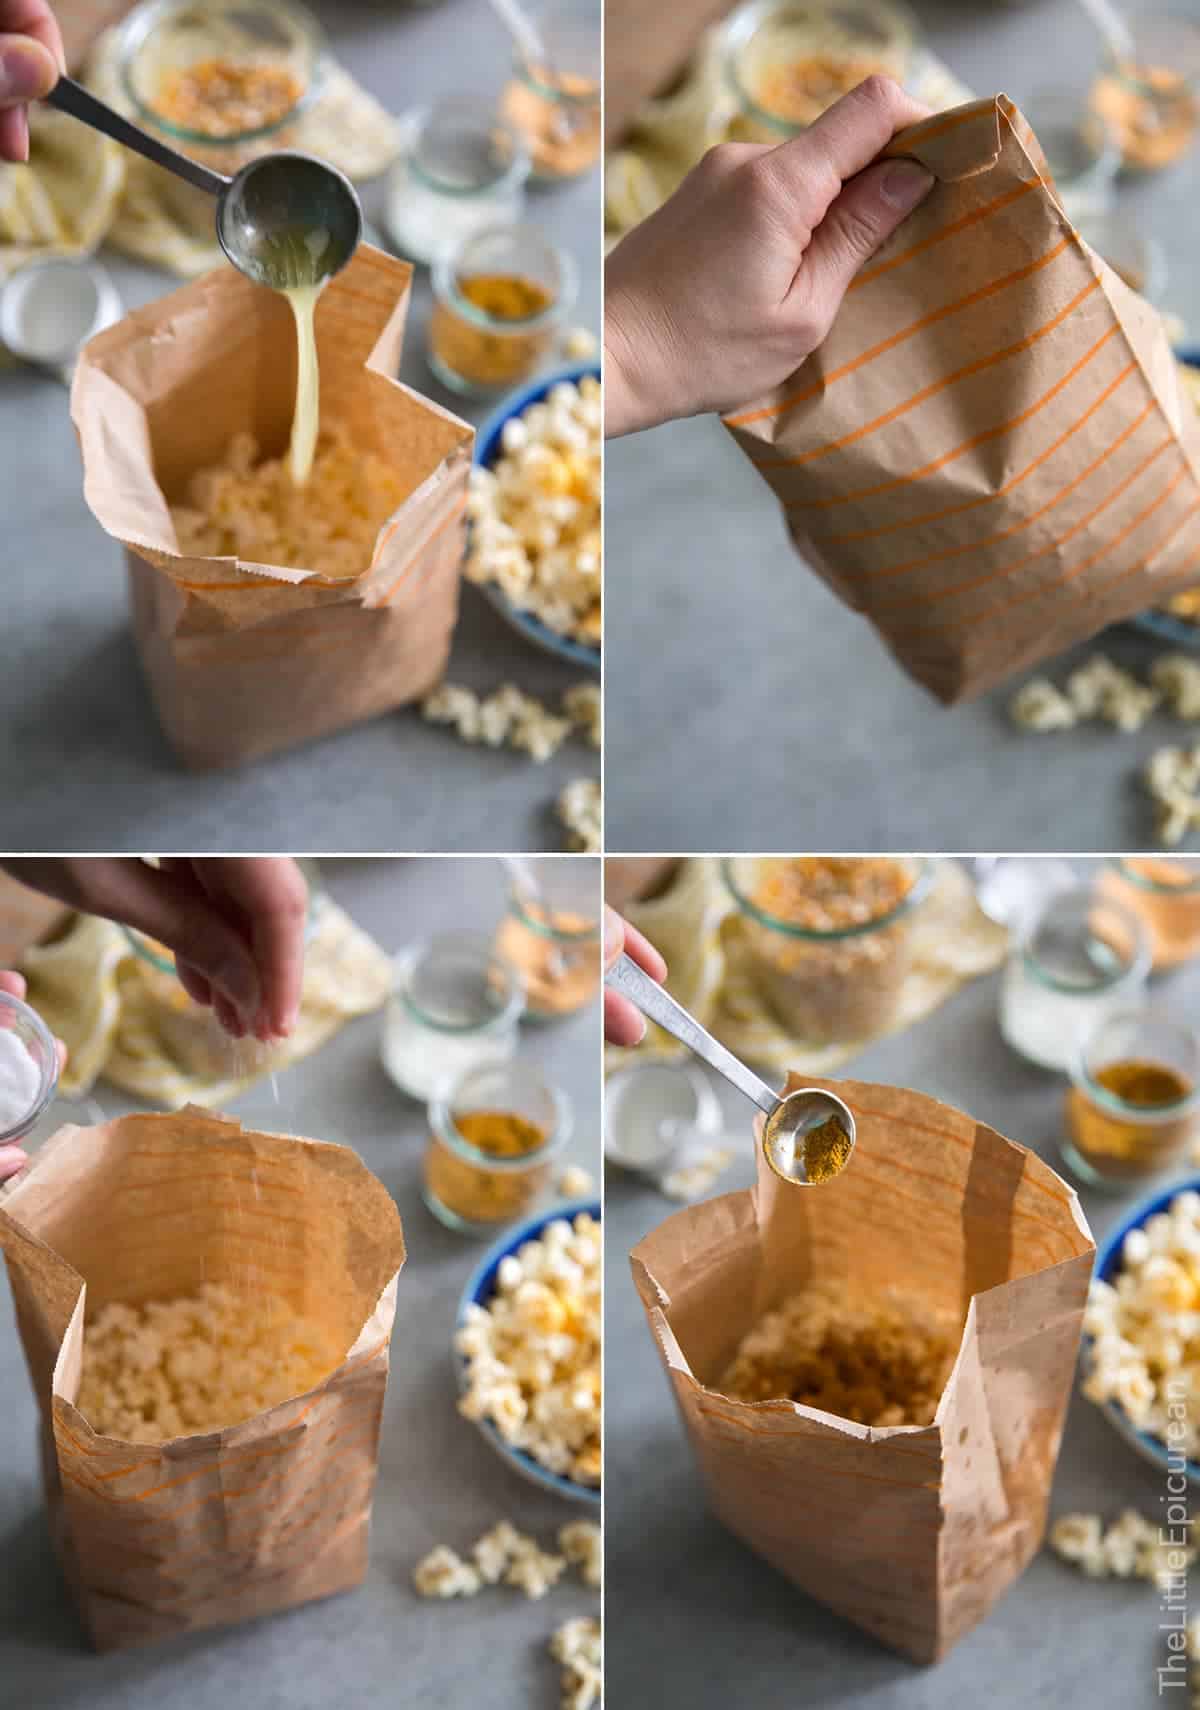 Homemade Microwave Popcorn (with flavor mix-ins!)